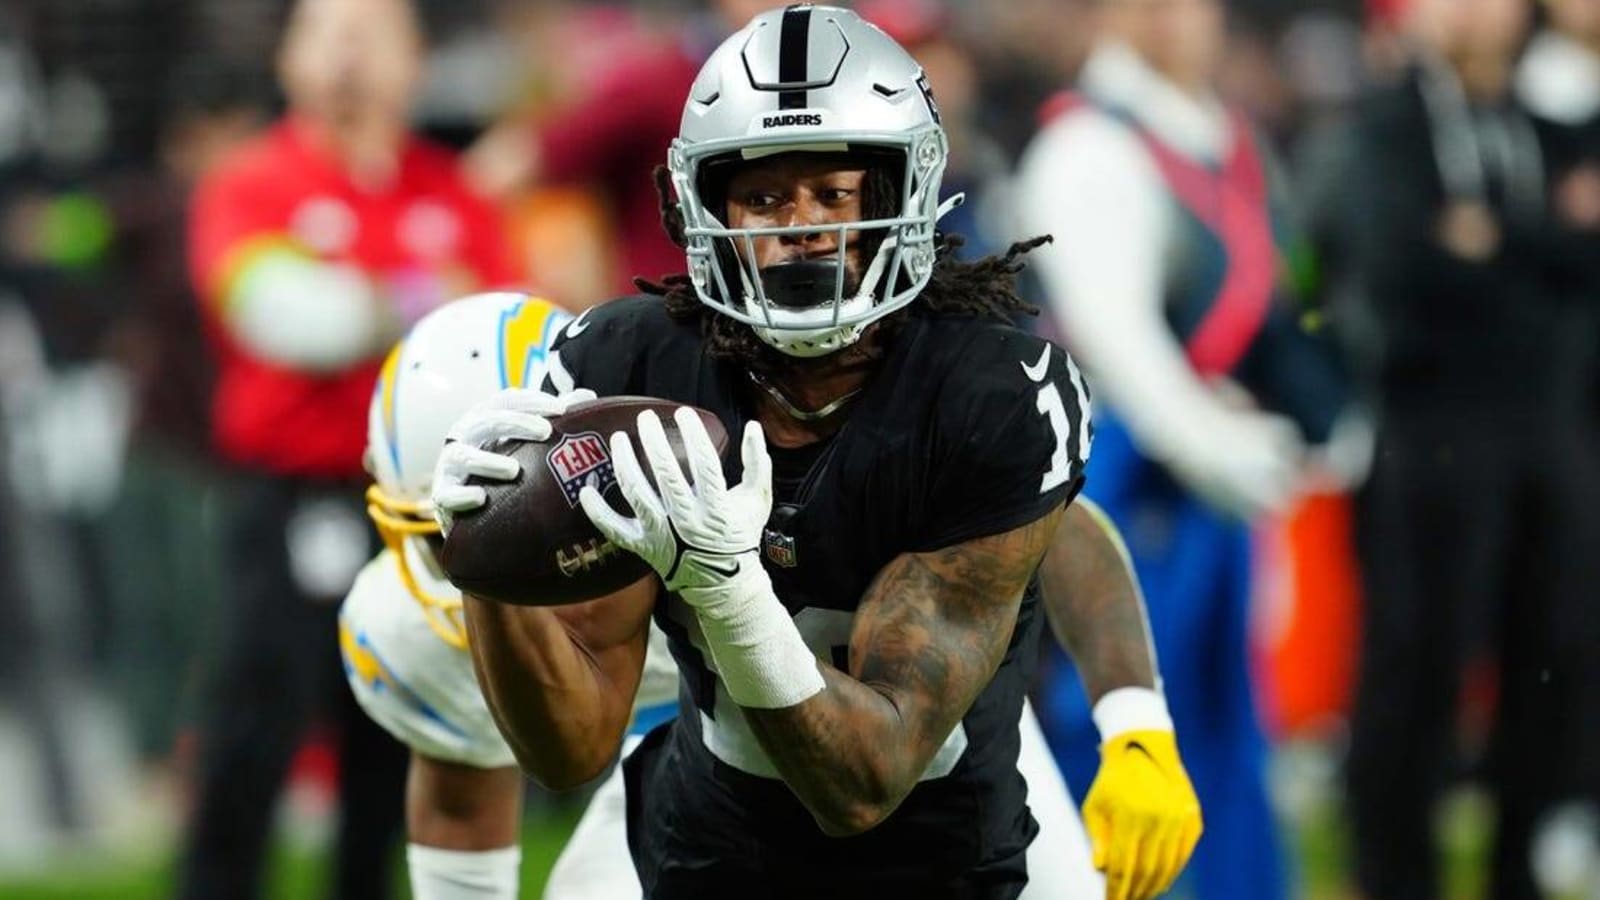 Raiders score team-record 63 points in blowout of Chargers